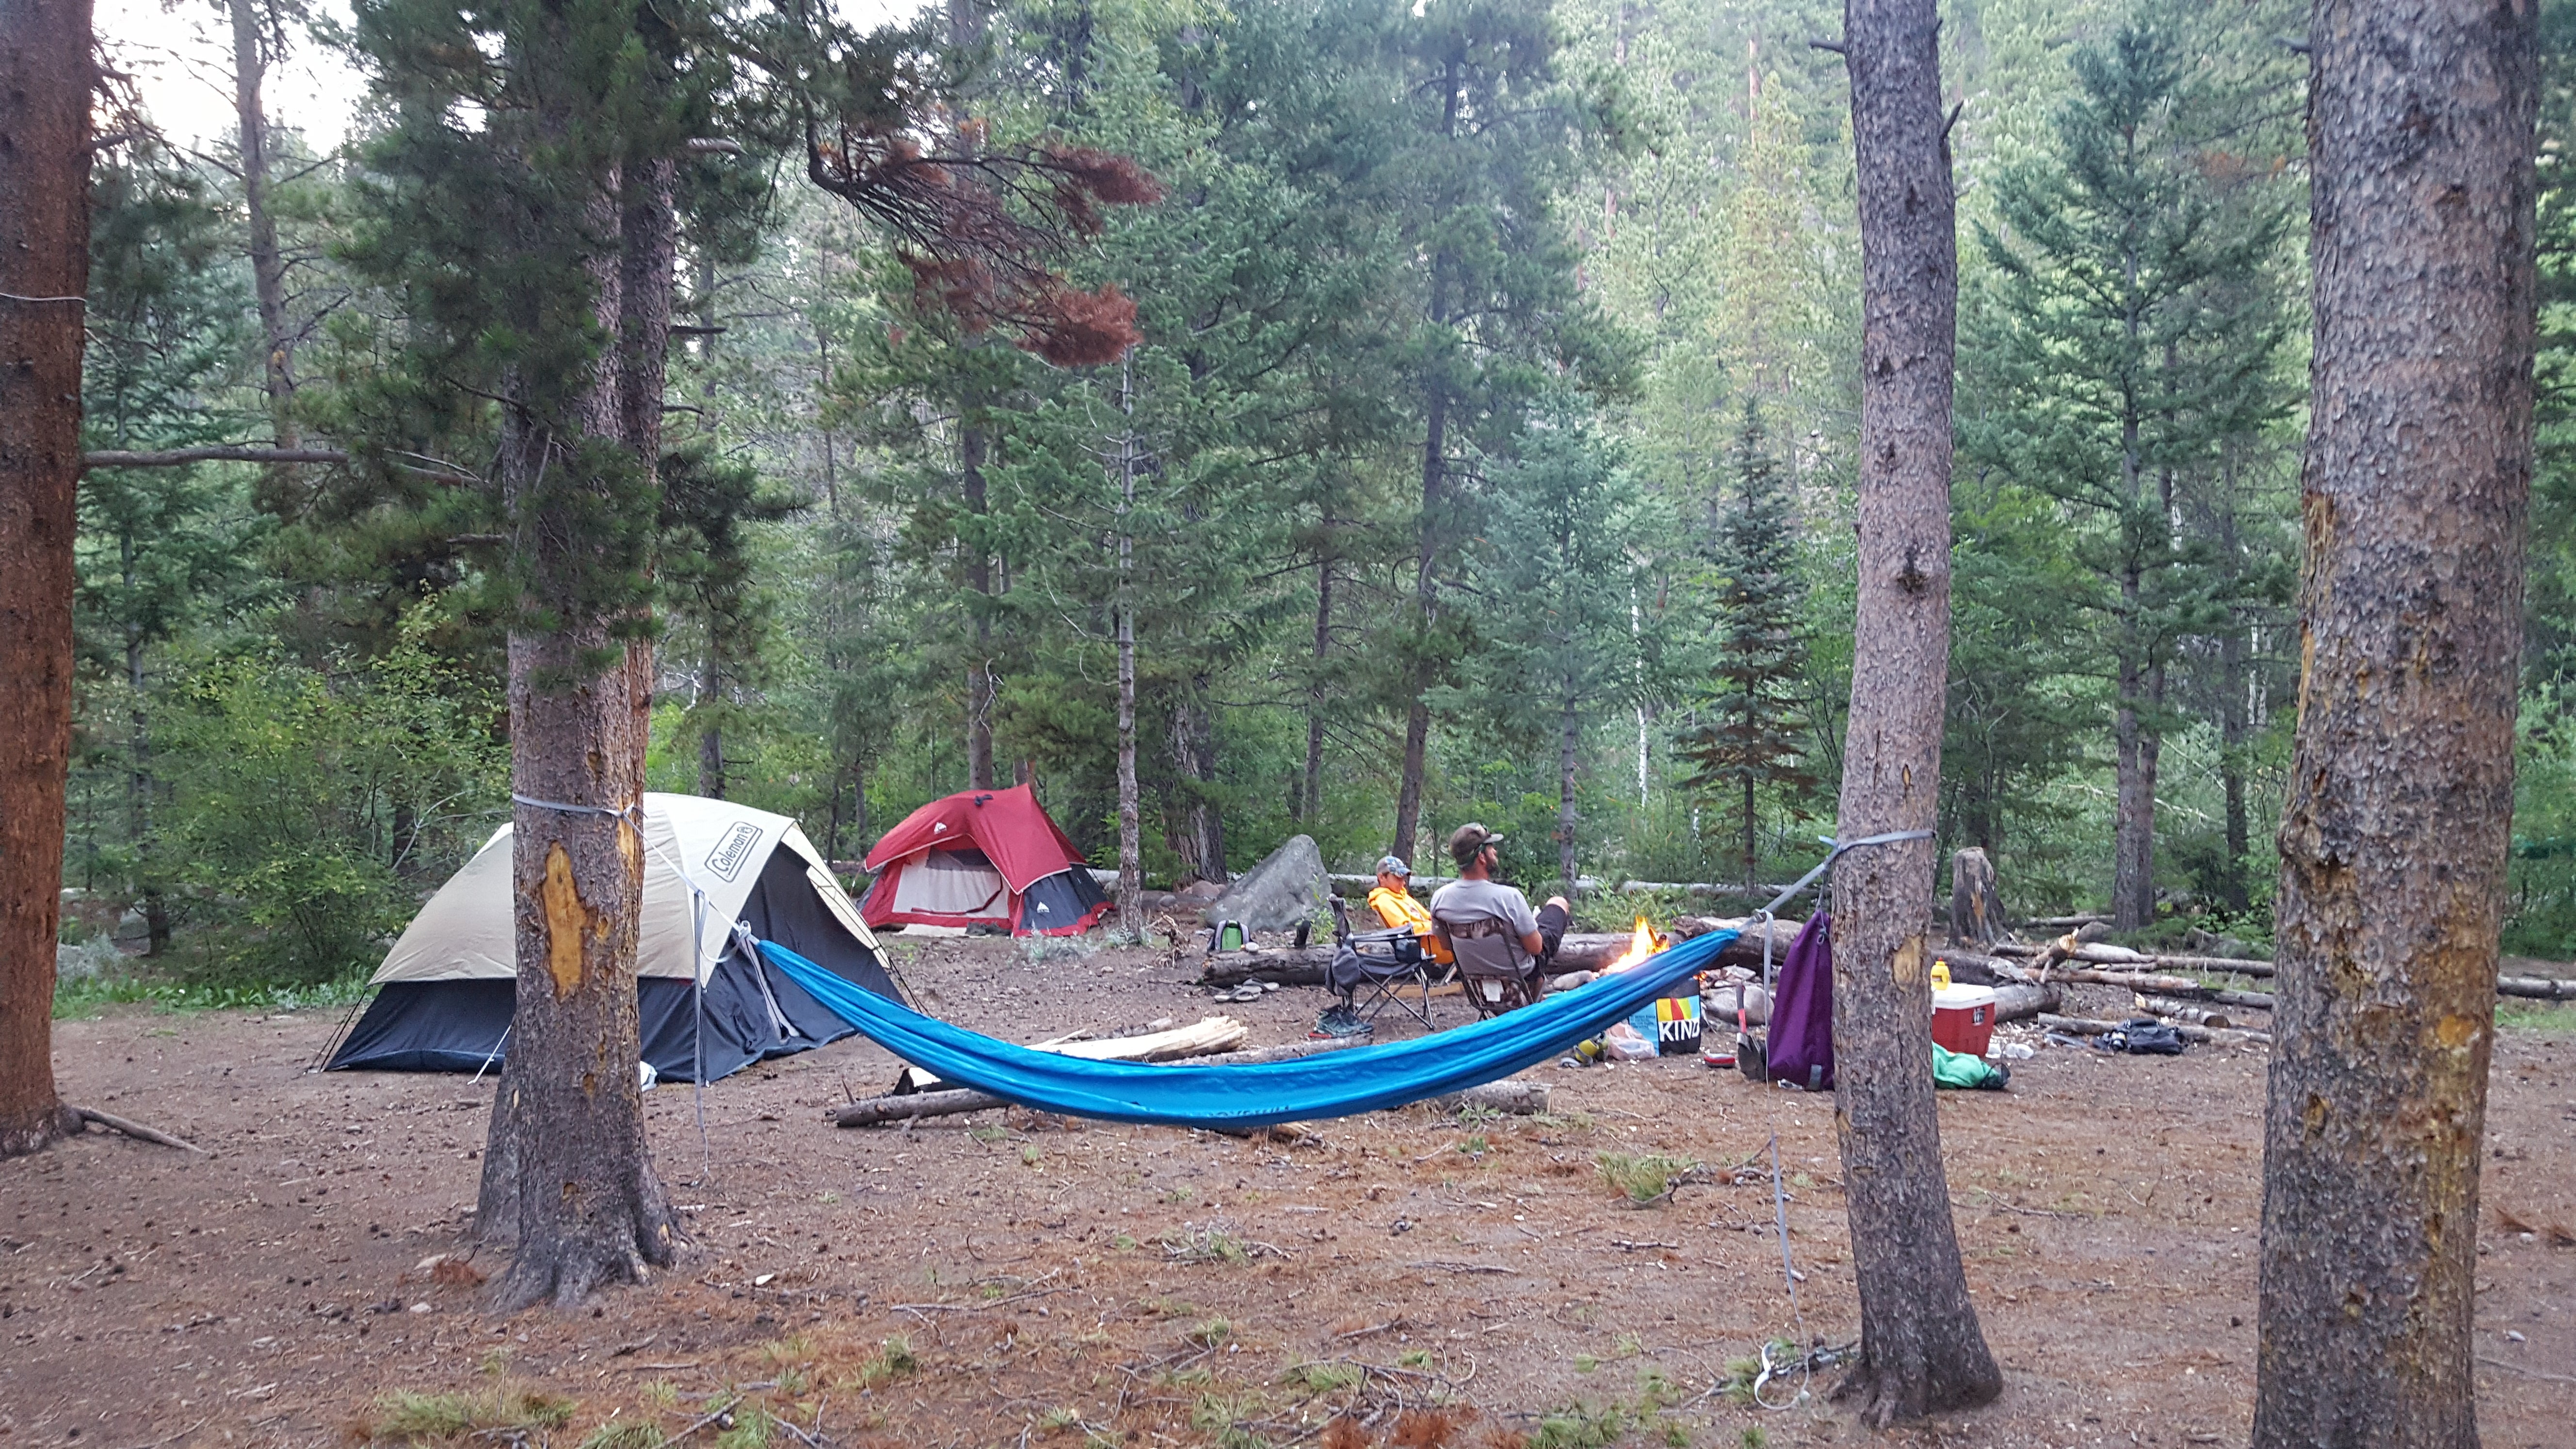 Camper submitted image from Ceran St. Vrain Trail Dispersed Camping - 5